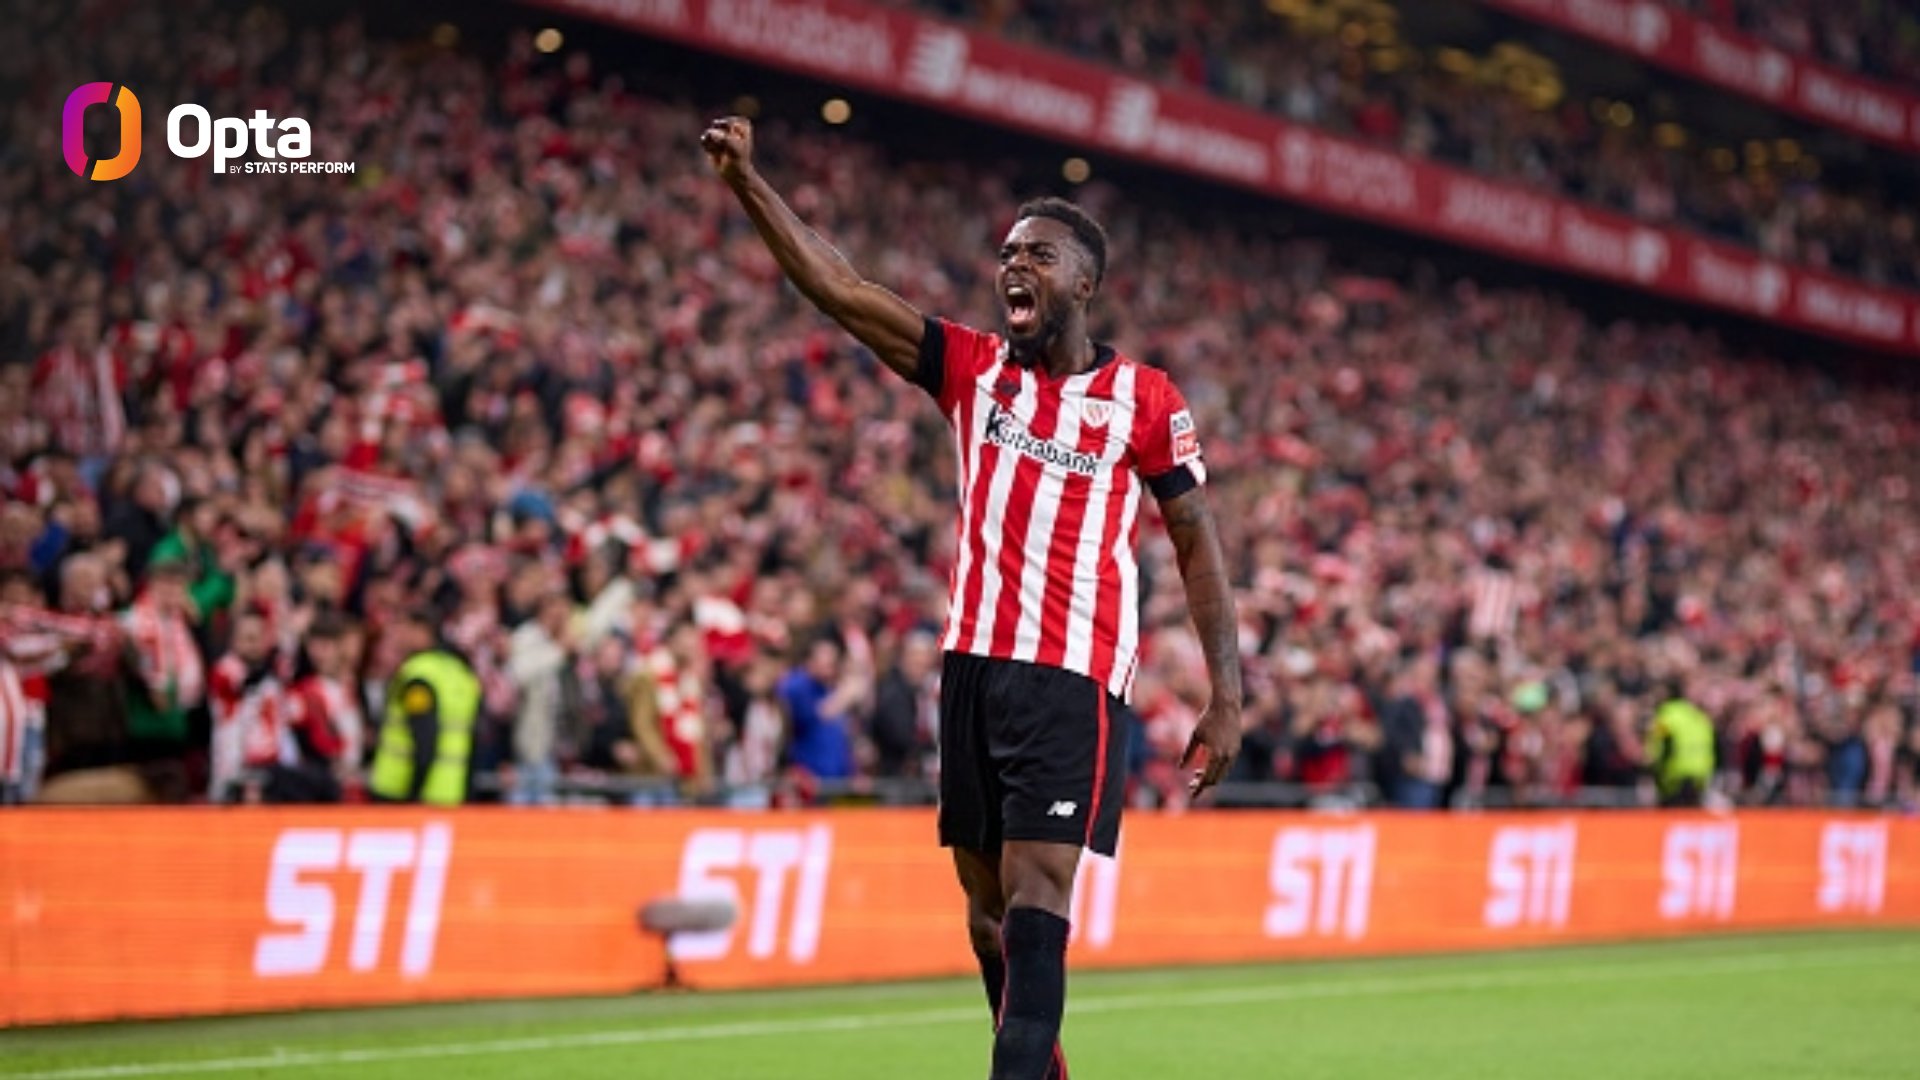 Inaki Williams ends goal drought with crucial strike for Athletic Club against Osasuna